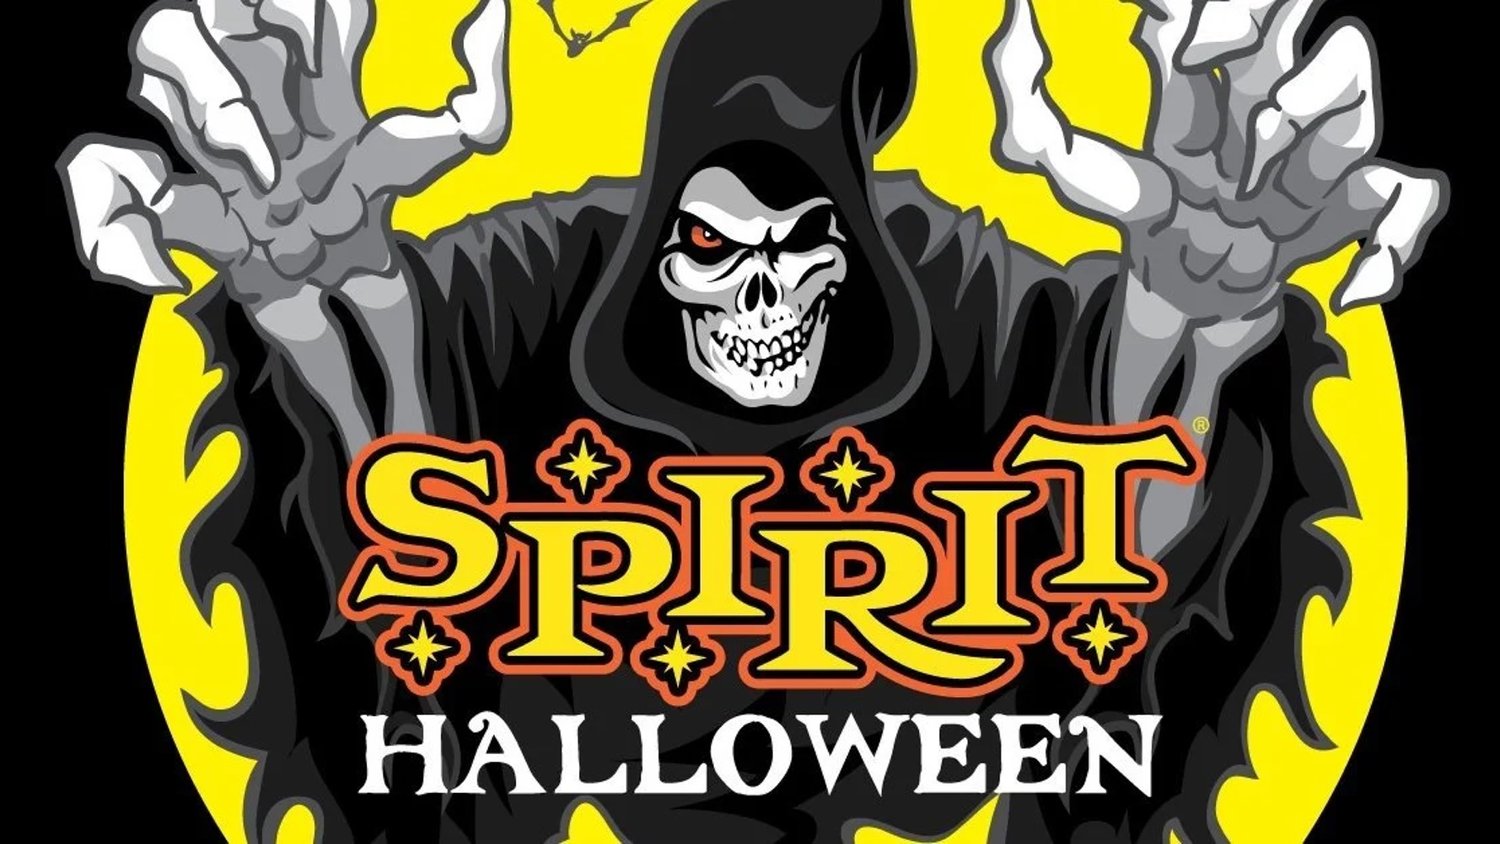 SPIRIT HALLOWEEN Family Horror Movie in the Works with Christopher Lloyd and Rachel Leigh Cook